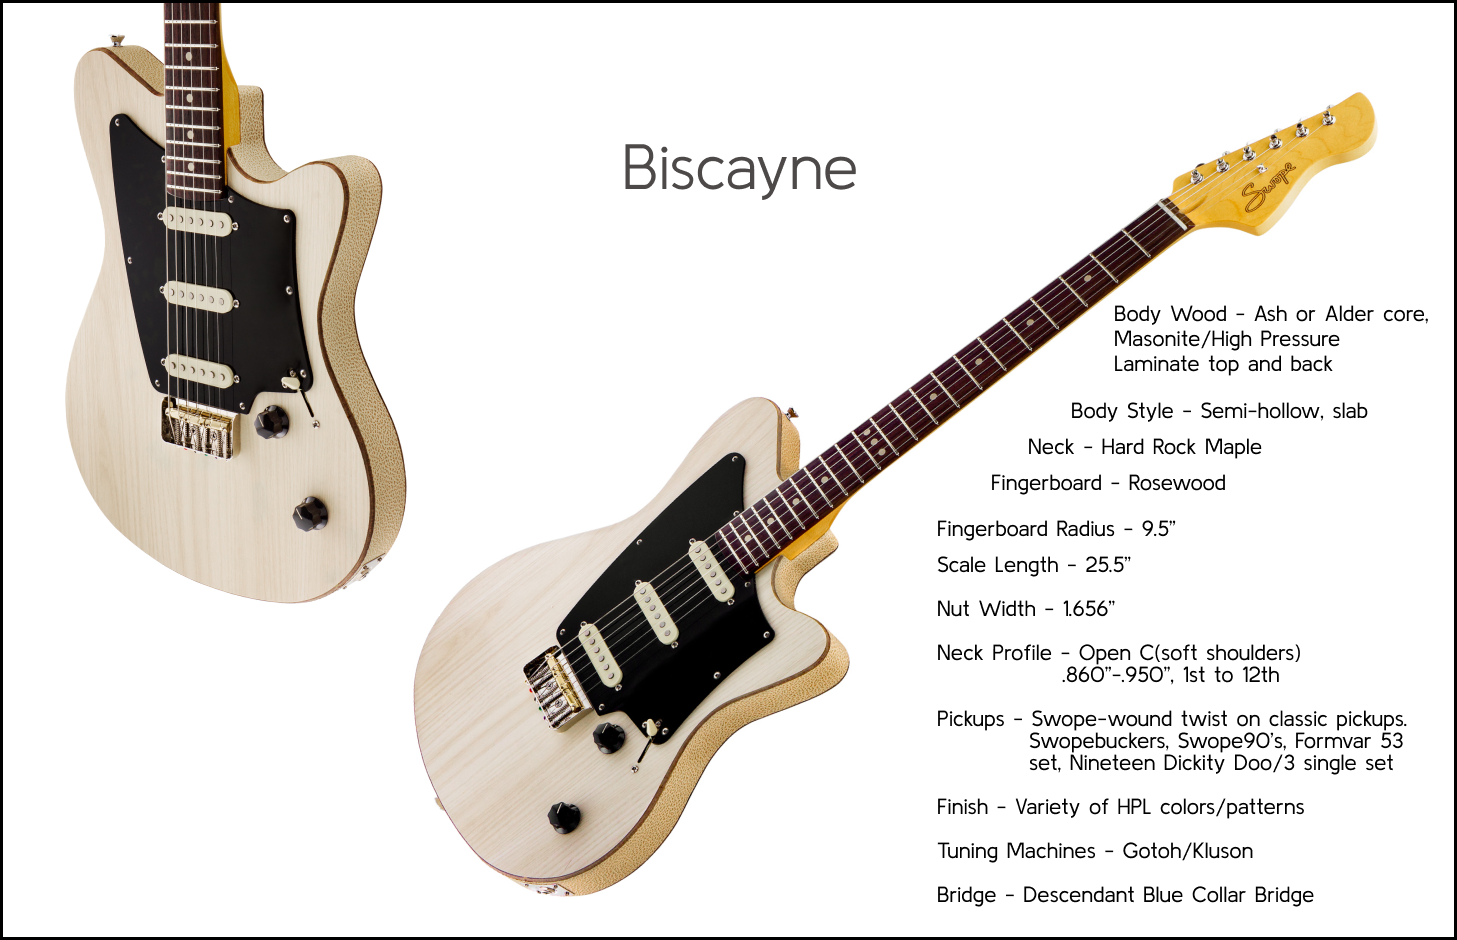 Picture of Biscayne guitar.